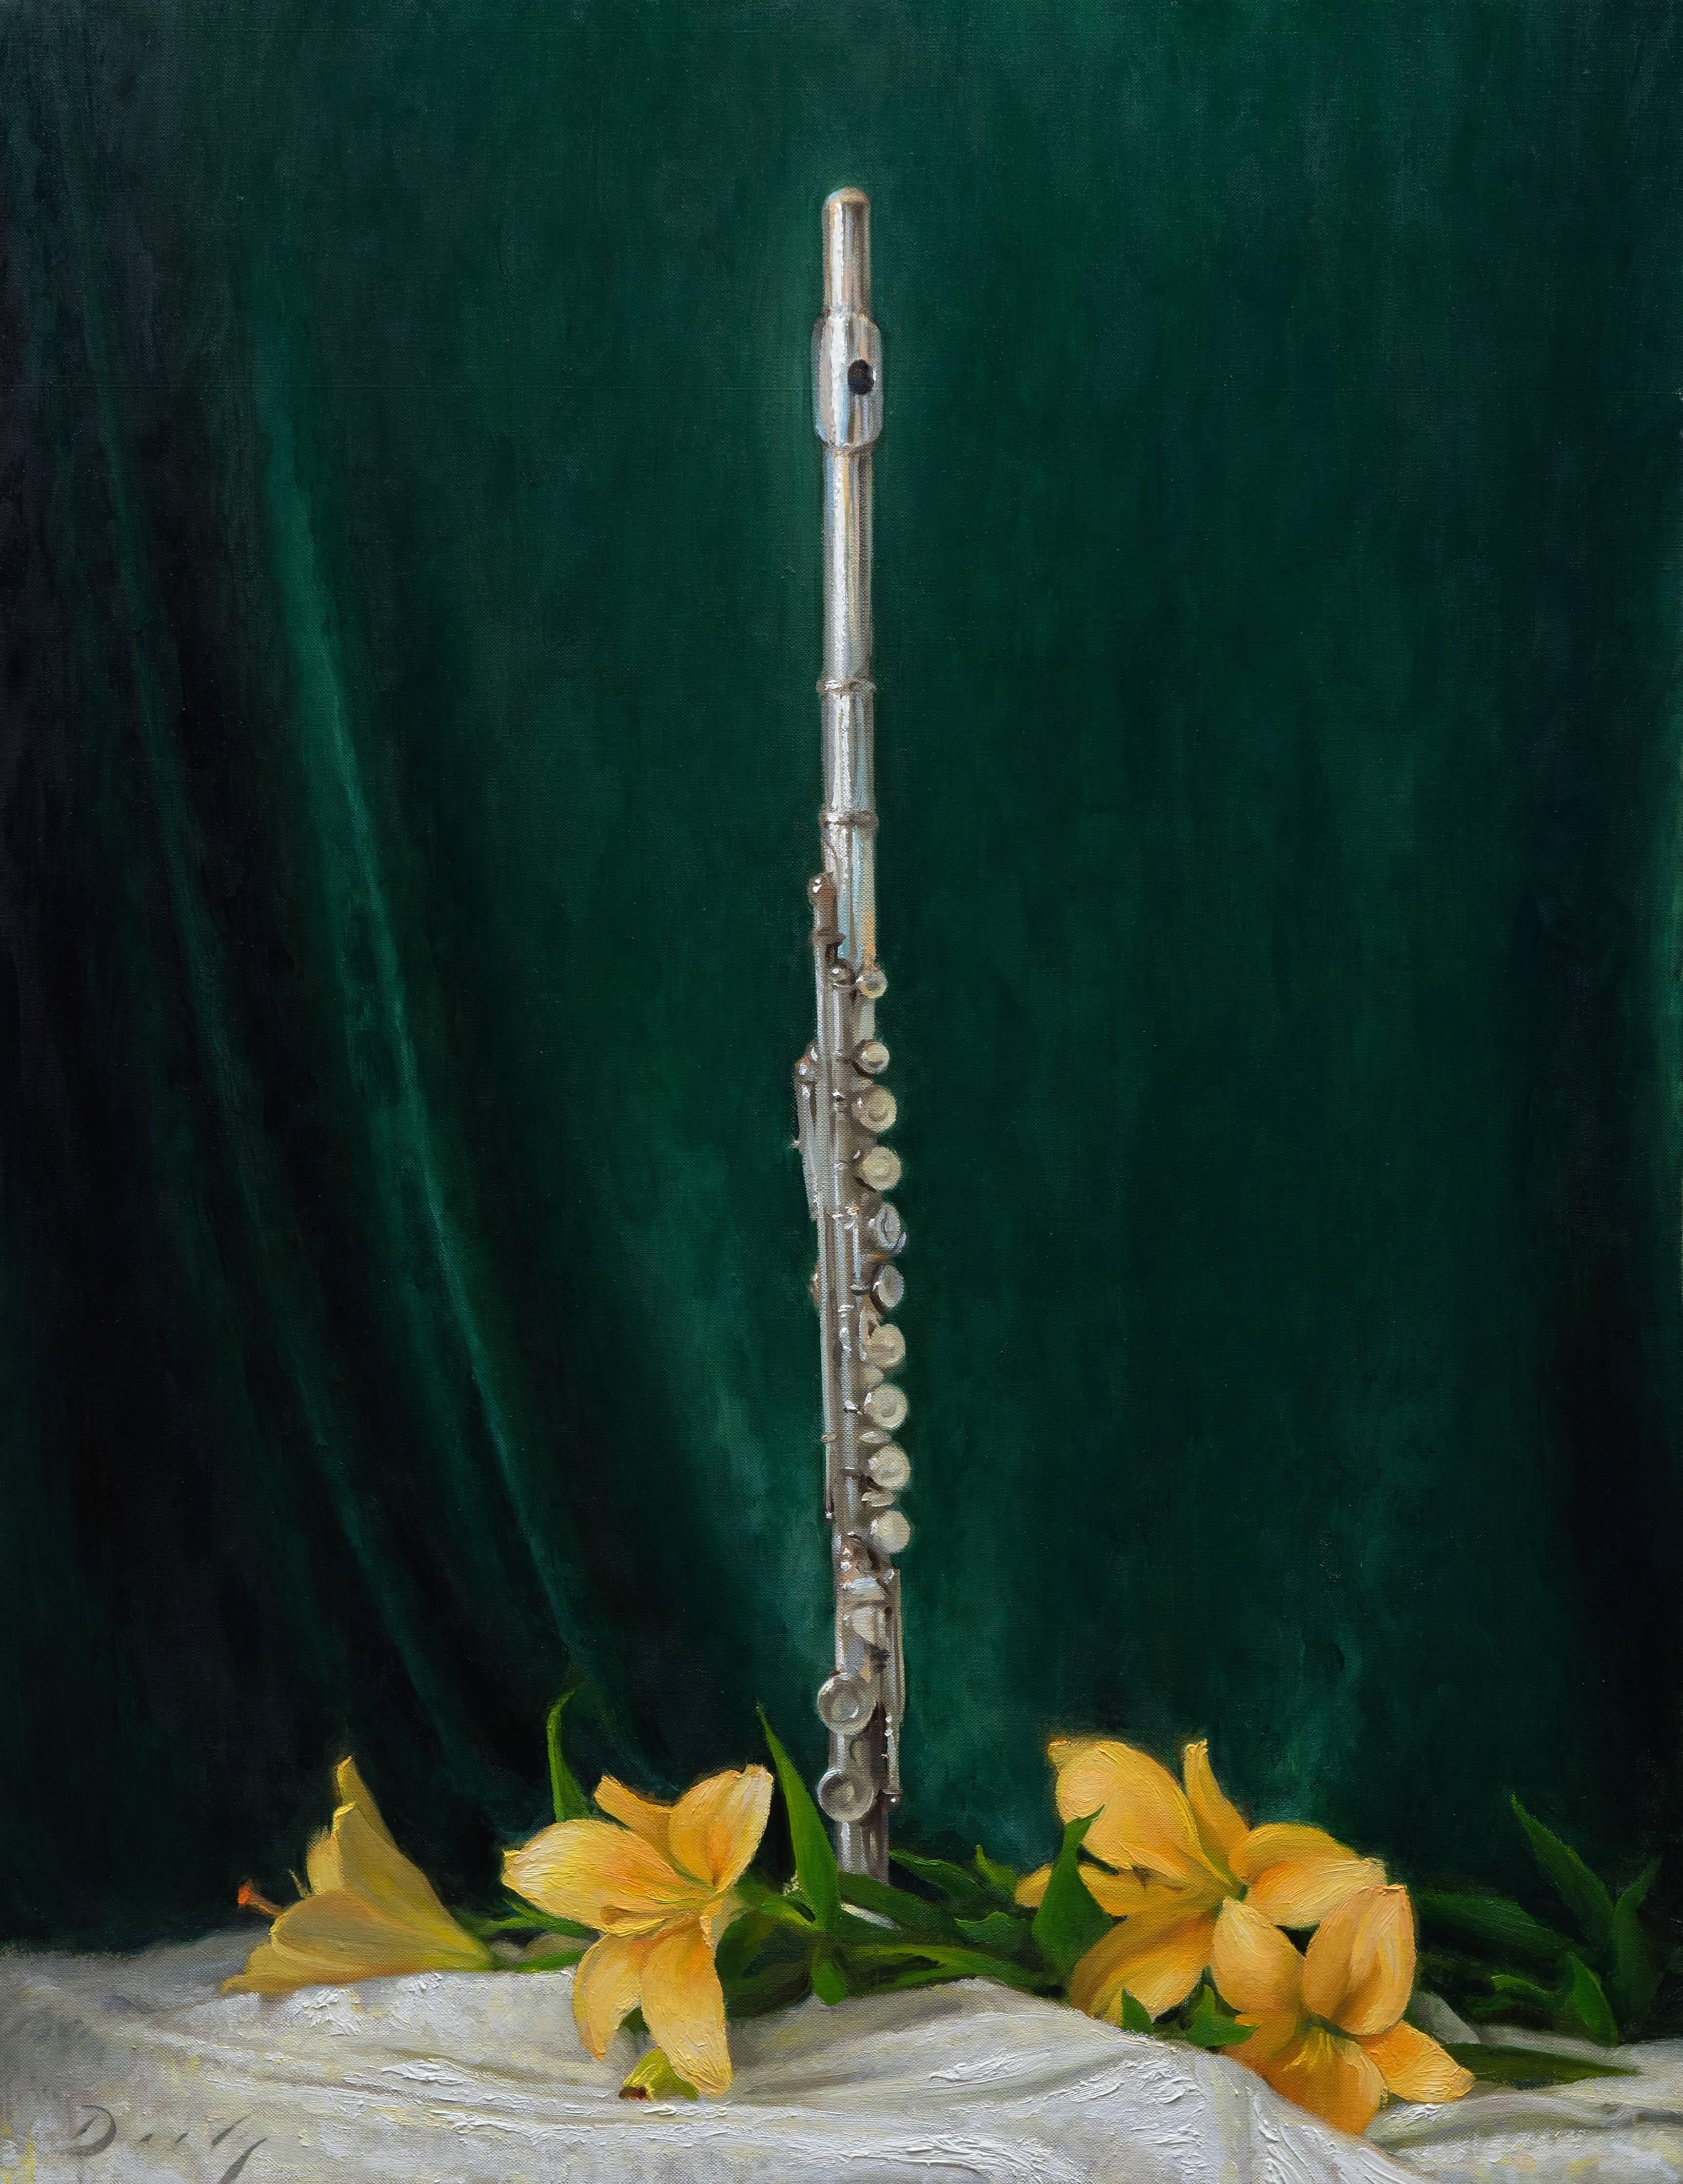 Joseph Q. Daily Still-Life Painting - Realist flute with green background and yellow flowers, "Emerald Isle" 